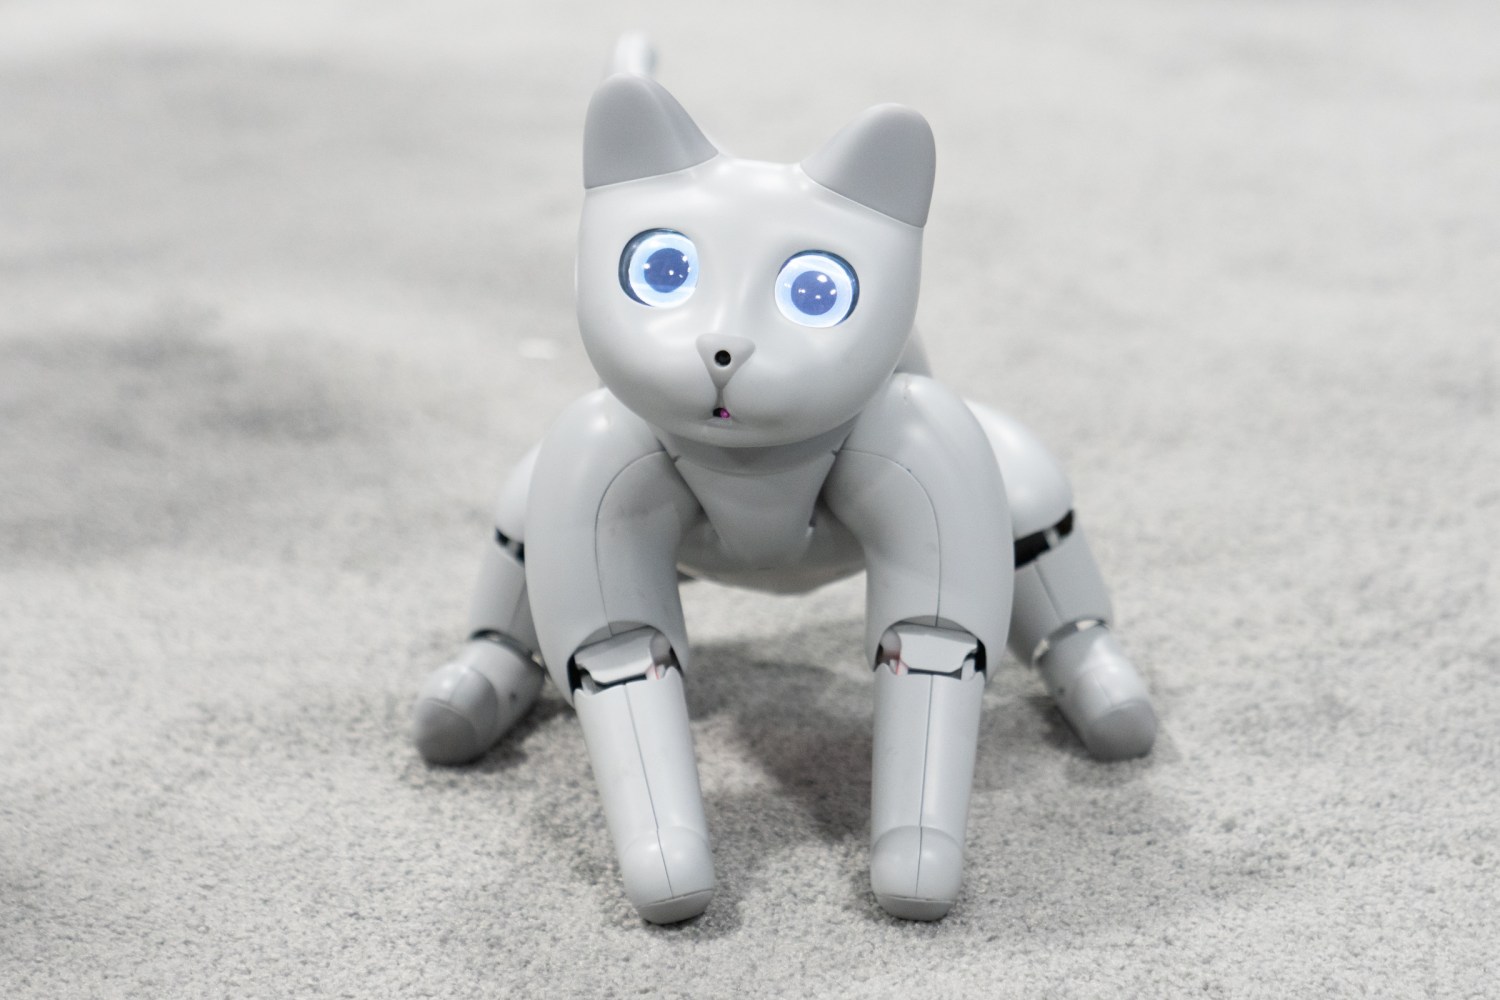 Meet MarsCat, a robot cat with lots of love to give and room to grow | TechCrunch